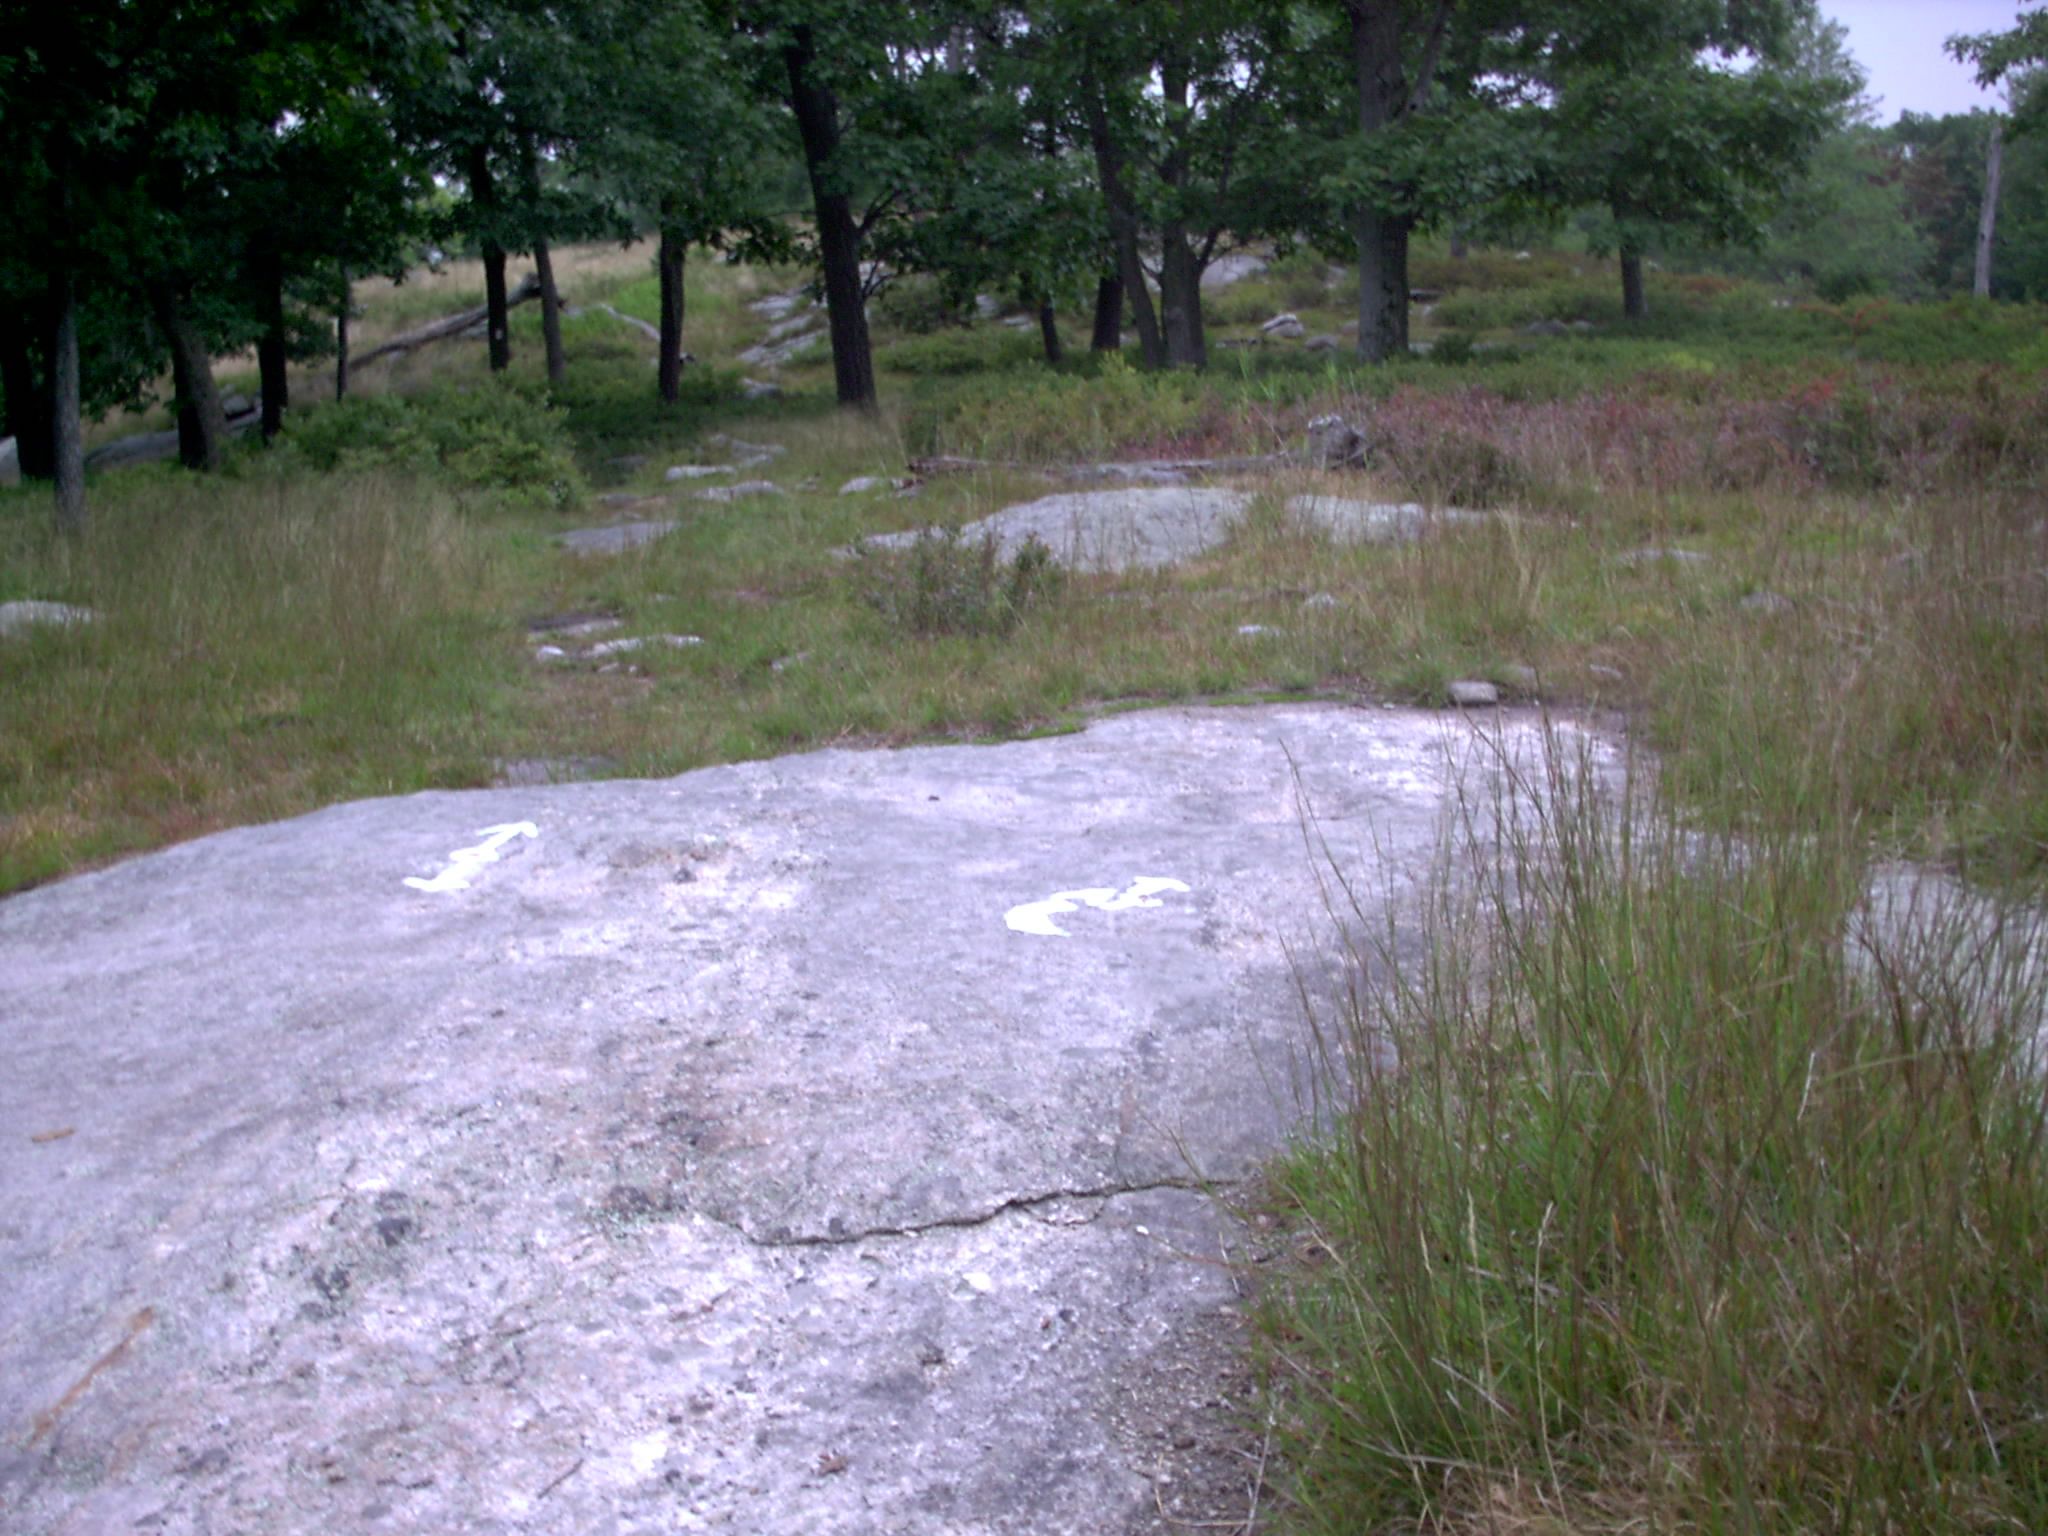 mm 1.2 - The junction of the Ramapo-Dunderberg Trail with the AT on a slickrock on top of Fingerboard Mt., about .1 miles south of Fingerboard shelter.  Courtesy stewartriley@earthlink.net